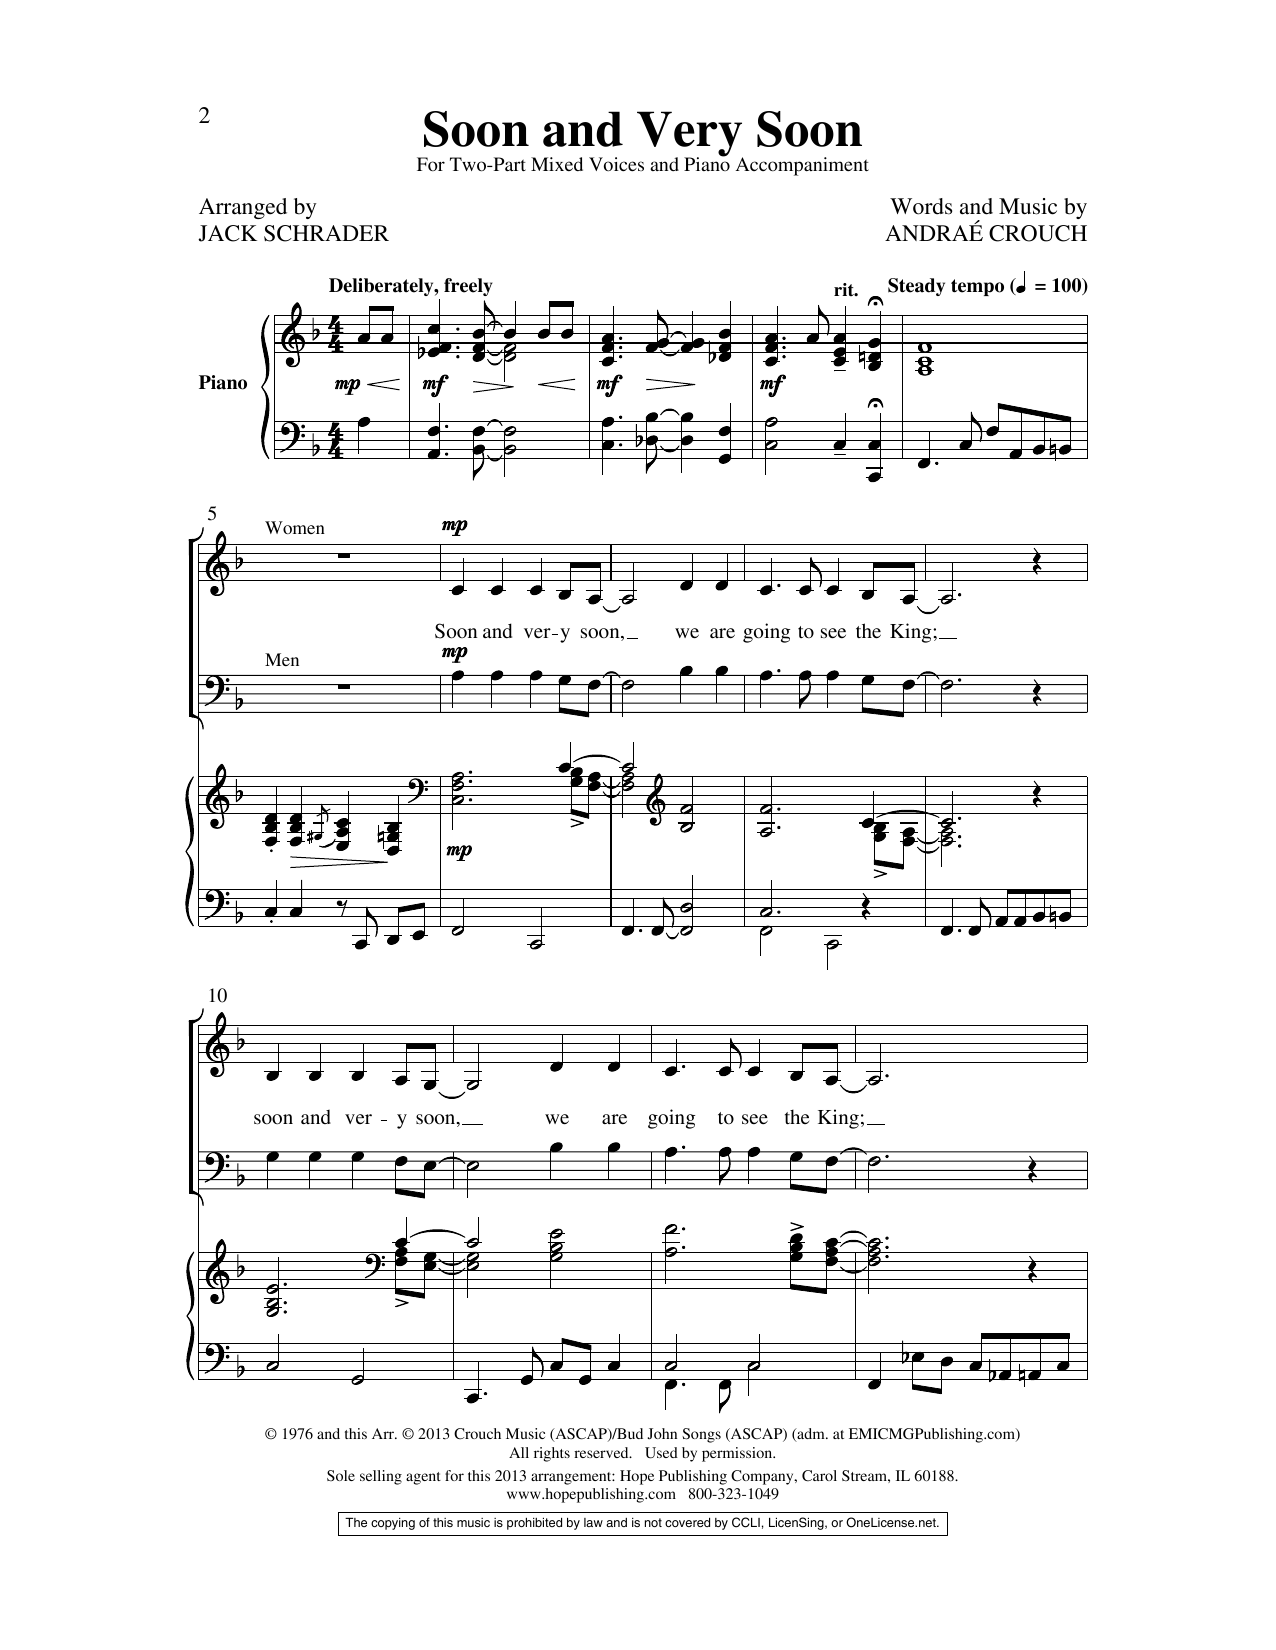 Andrae Crouch Soon and Very Soon (arr. Jack Schrader) sheet music notes and chords. Download Printable PDF.